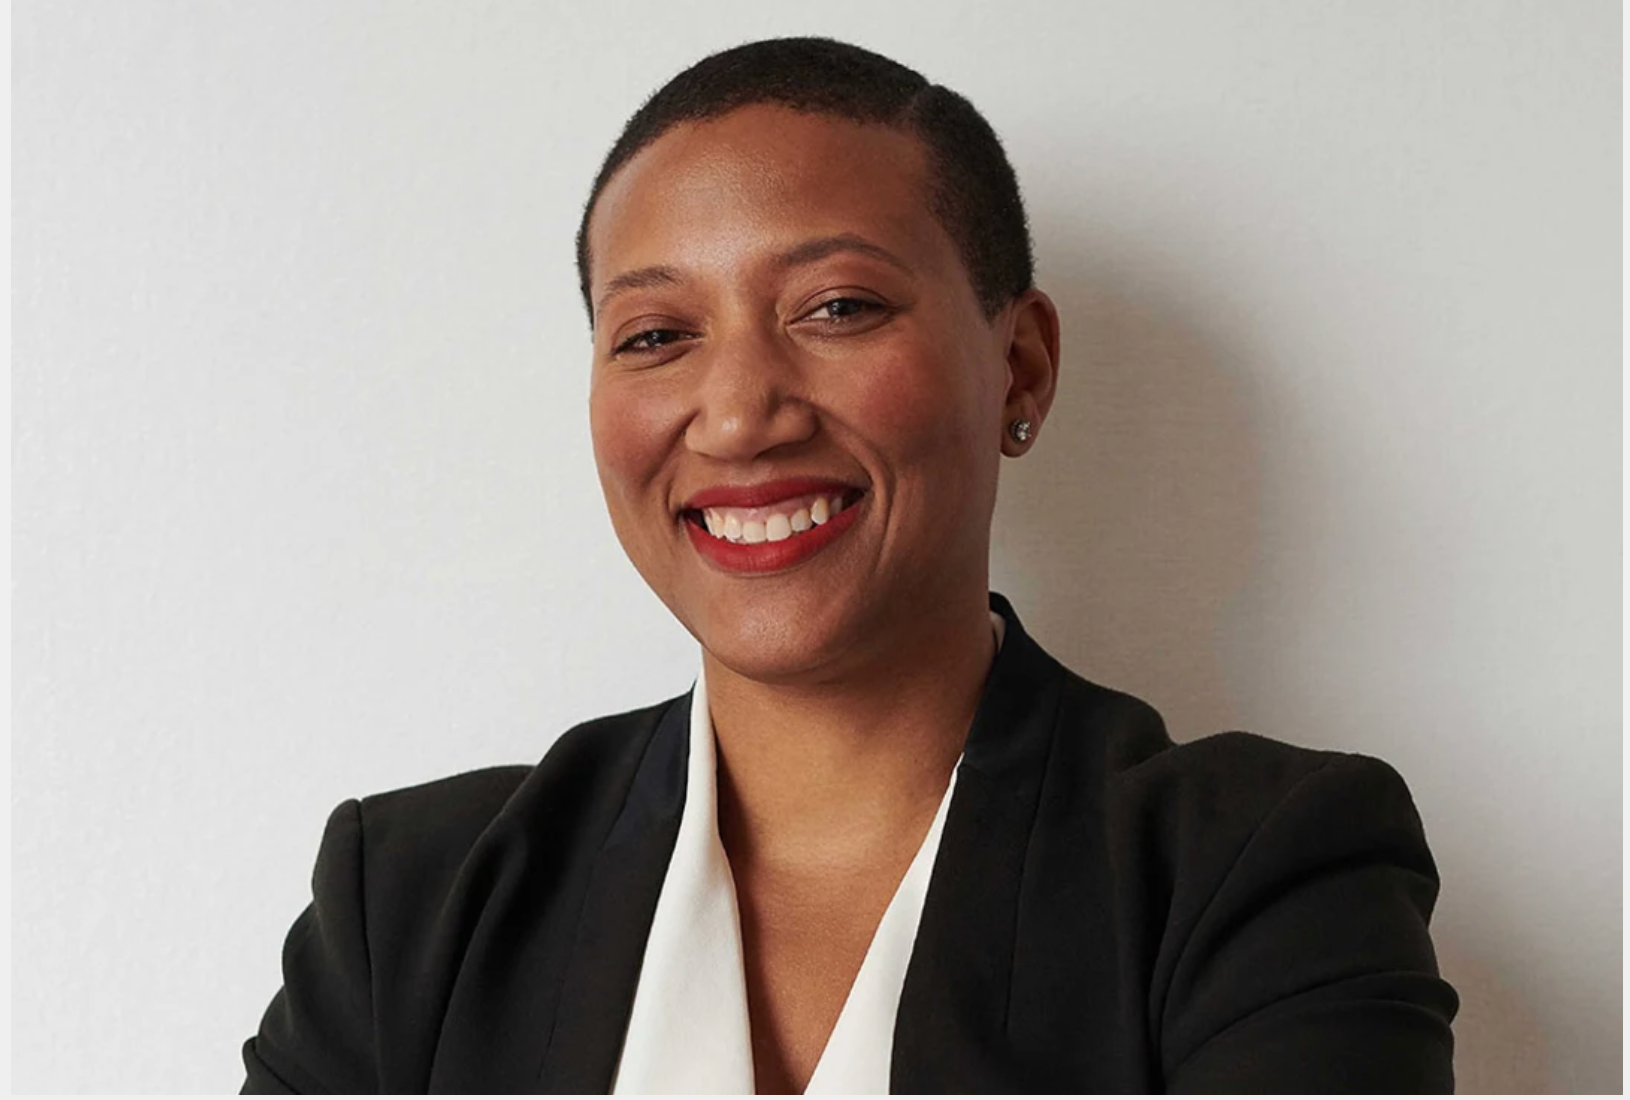 American Institute Of Architects Elects First Black Woman As President